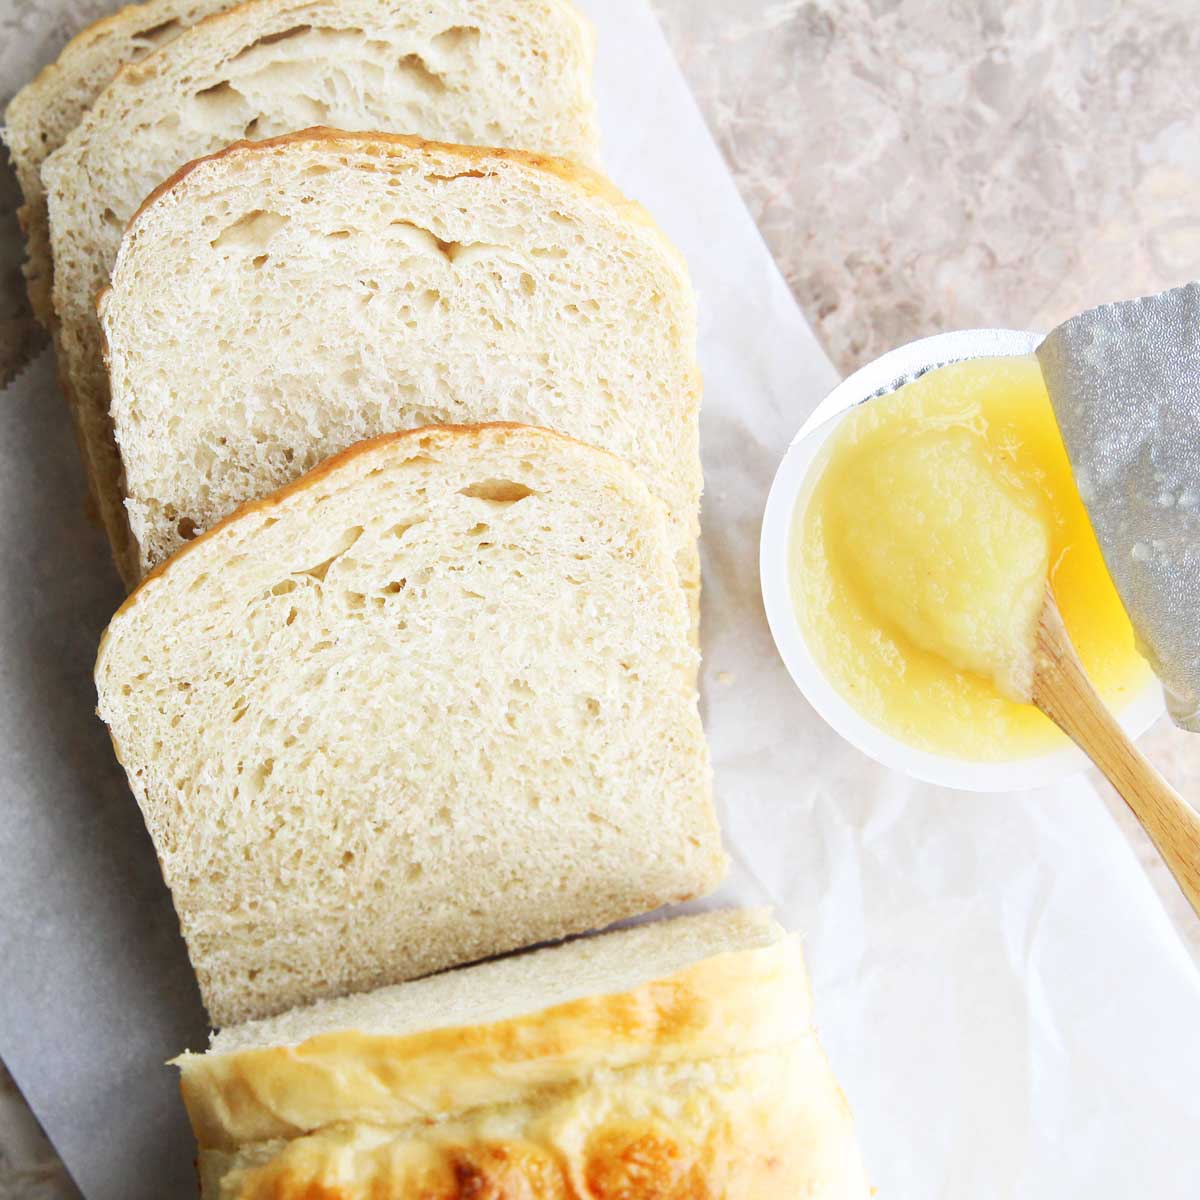 Applesauce Yeast Bread (A Healthier Recipe for White Bread) - Roasted Corn Naan